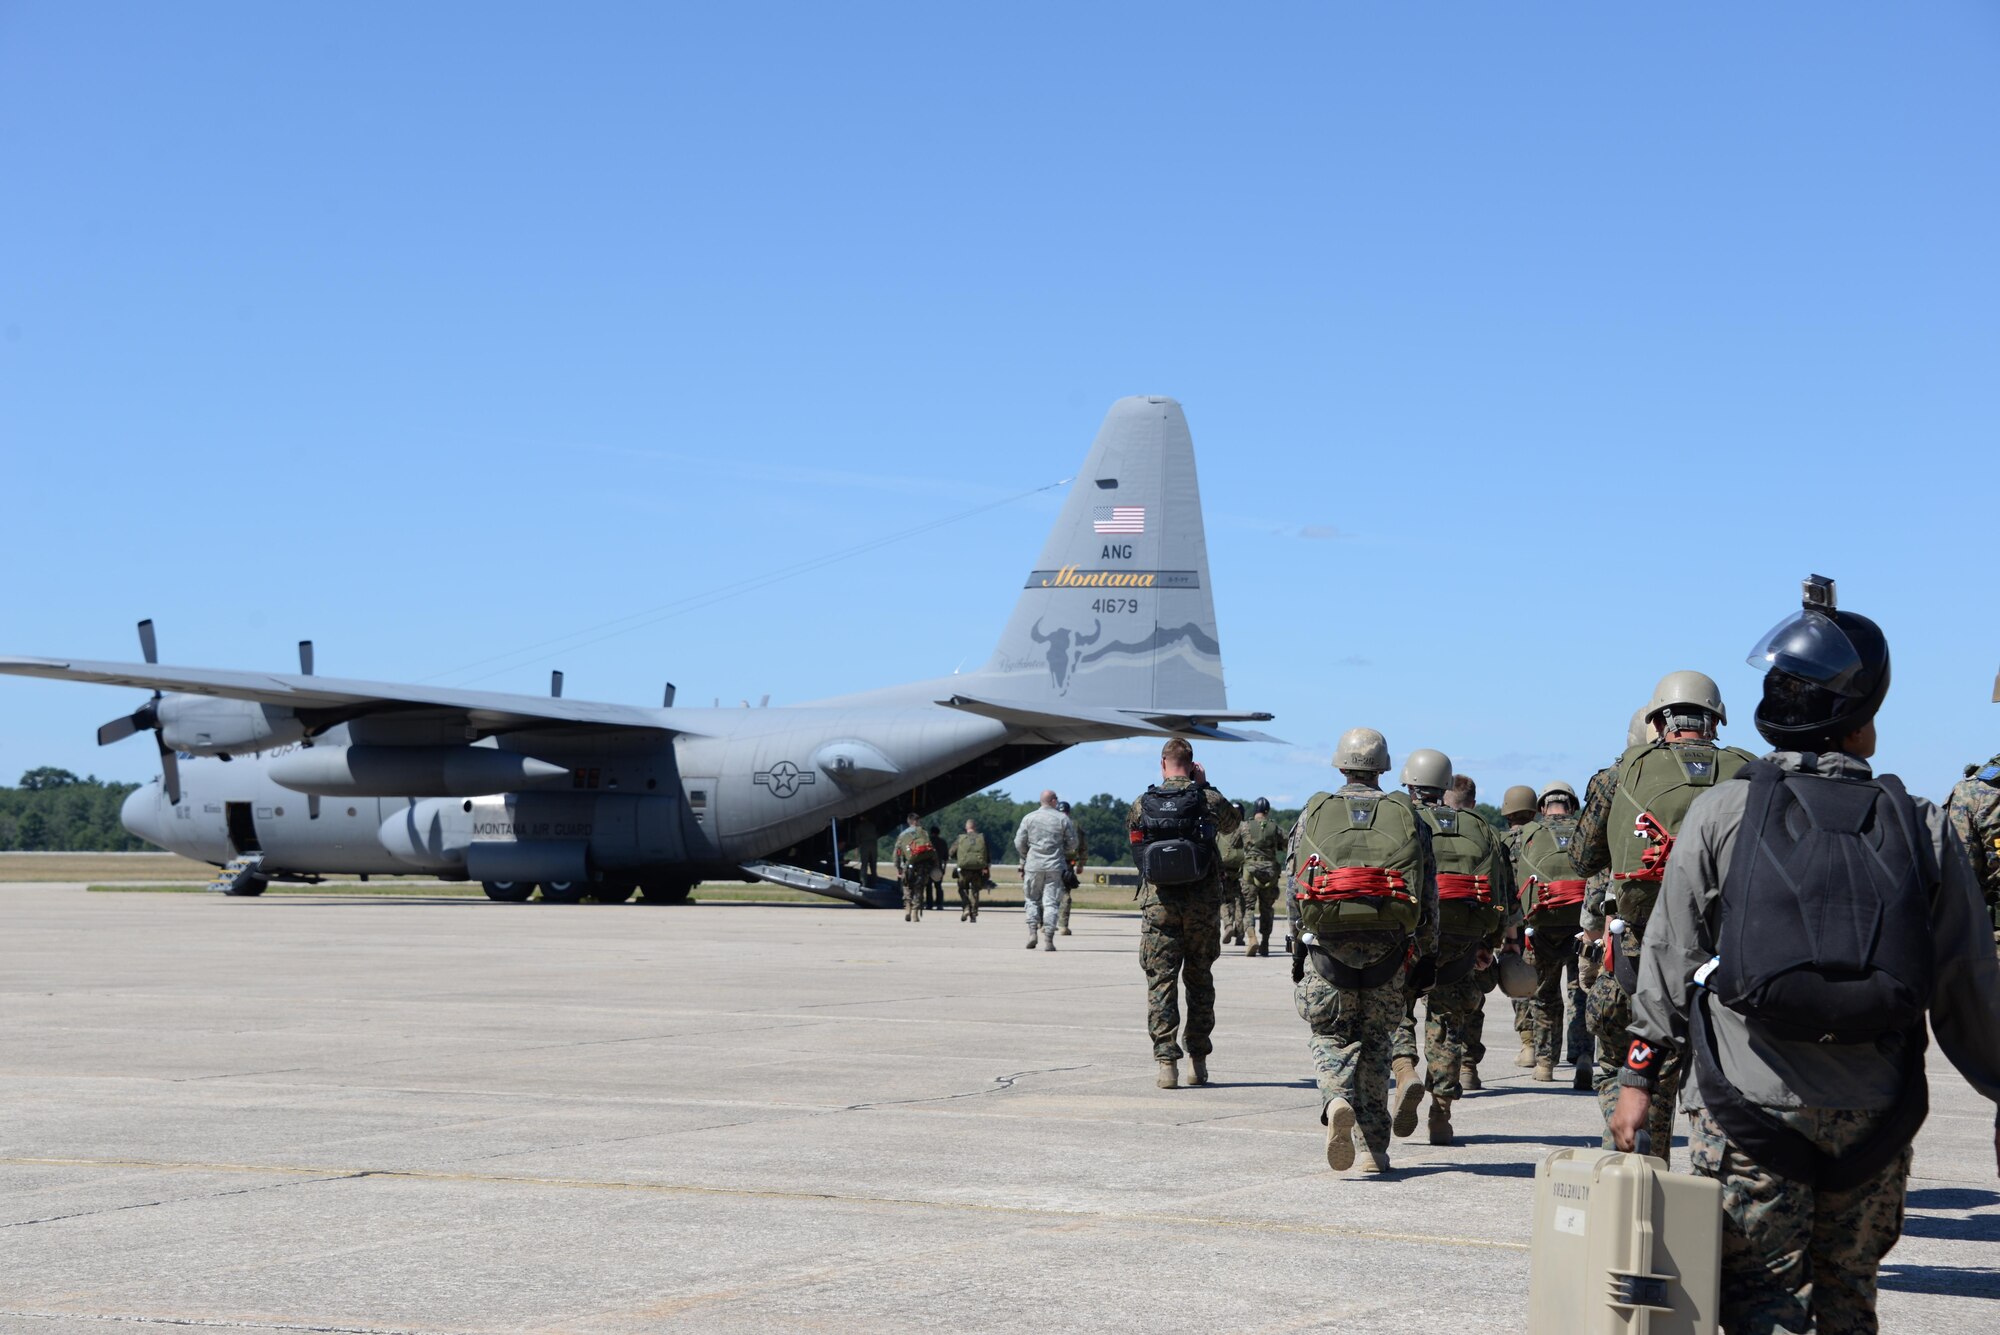 U.S. Marines from the 4th Reconnaissance Element out of Fort Sam Houston, Texas, load on to a C-130 Hercules from the Illinois Air National Guard at Grayling Army Airfield, Michigan, as part of Exercise Northern Strike, Aug. 8, 2016. The exercise brought together multiple branches, states and countries. (U.S. Air Force photo by Senior Airman Amber Carter)